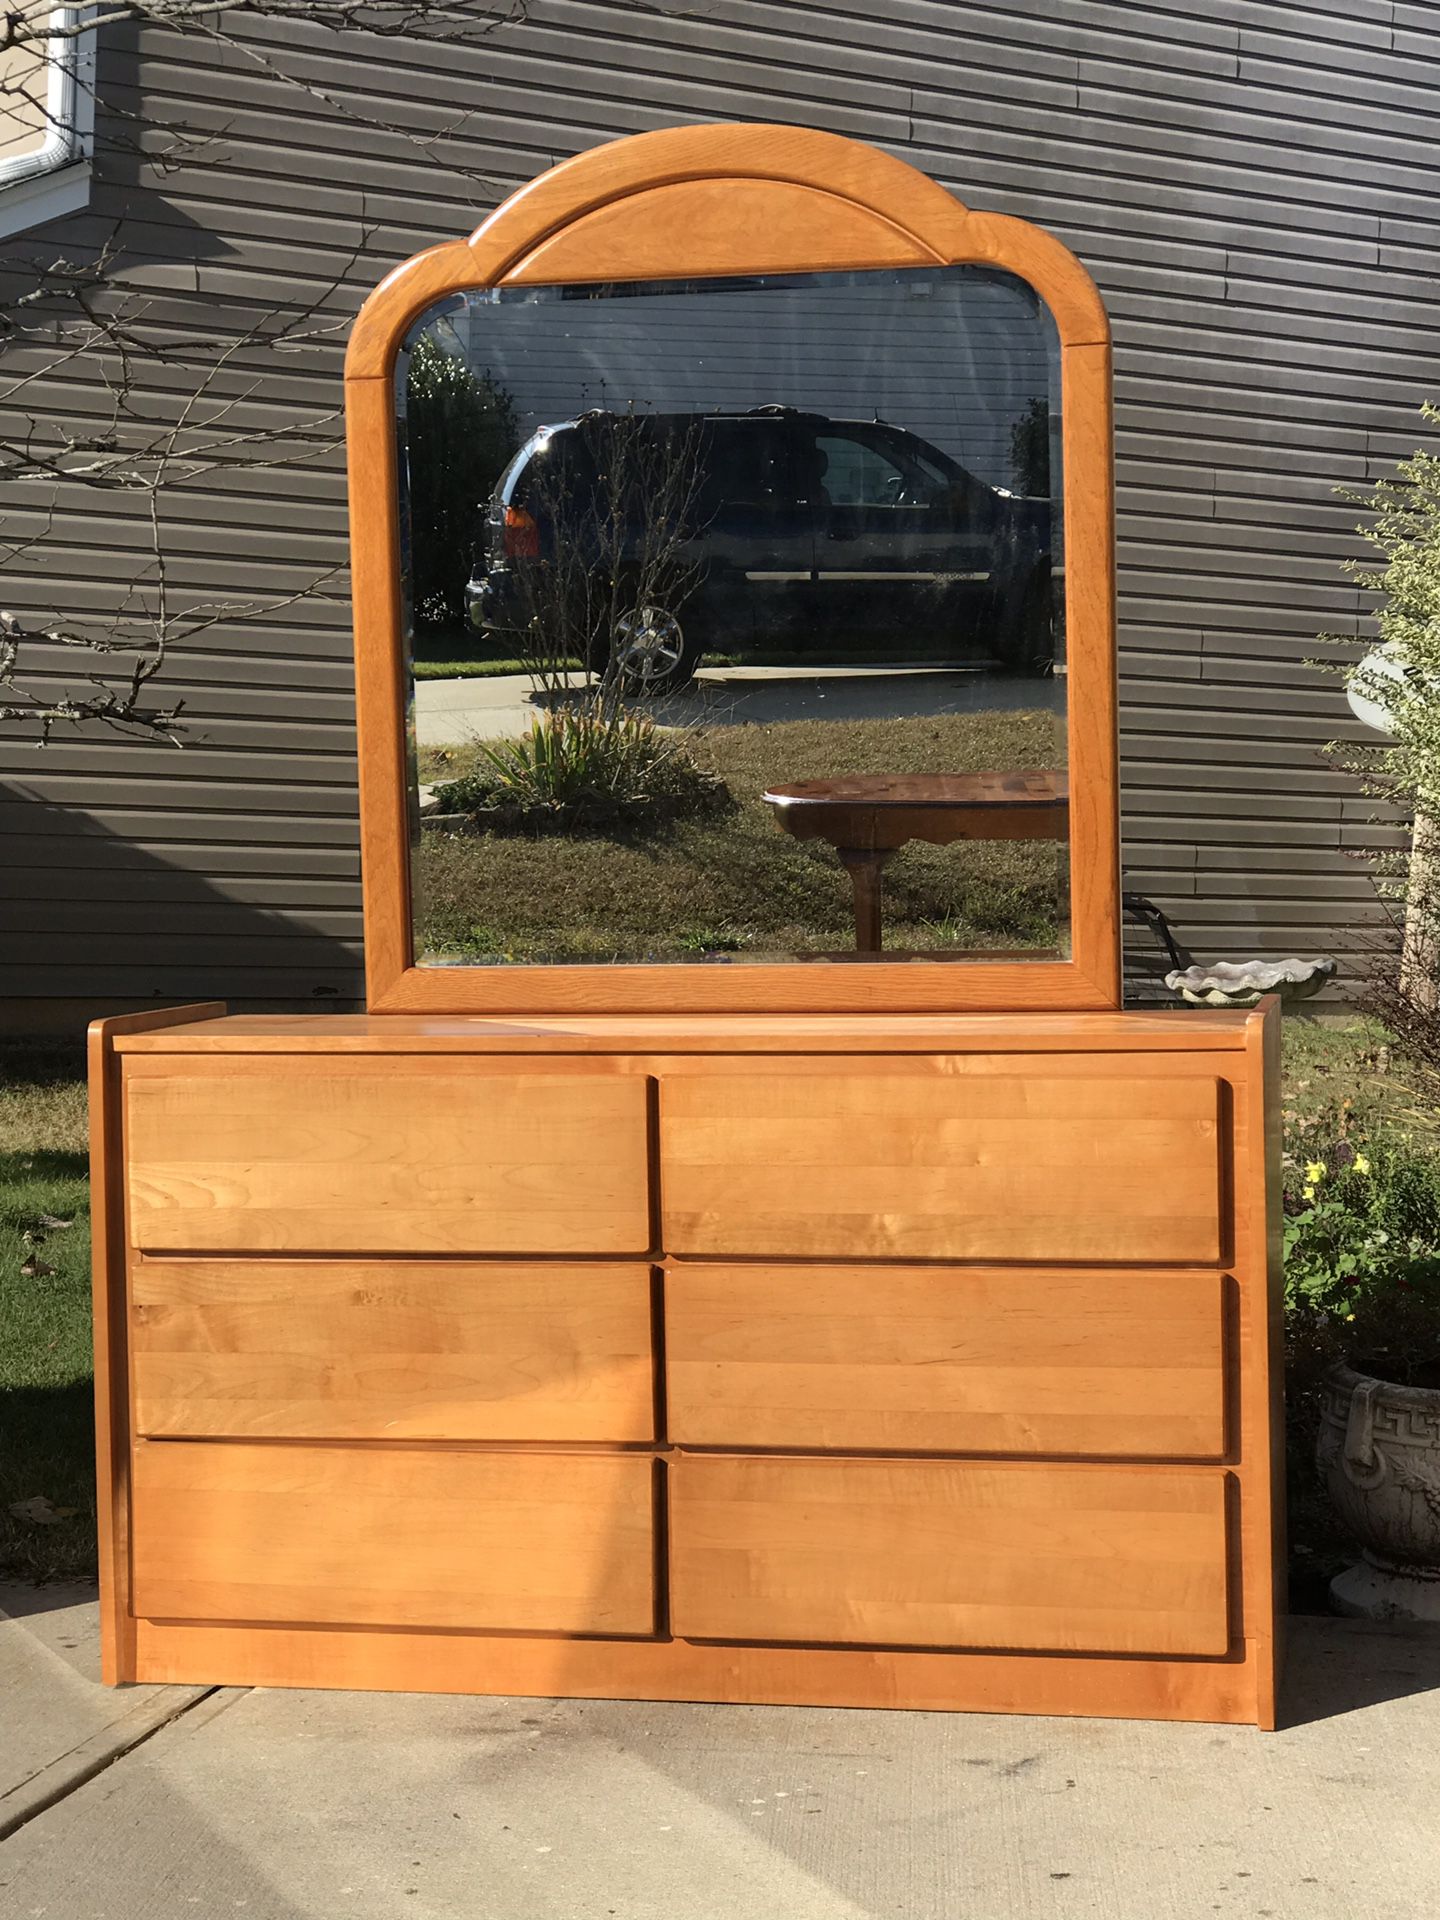 Solid Wood Dresser with 6 Deep smooth Drawers and Mirror. Excellent condition. Hablar Espanol. Delivery available